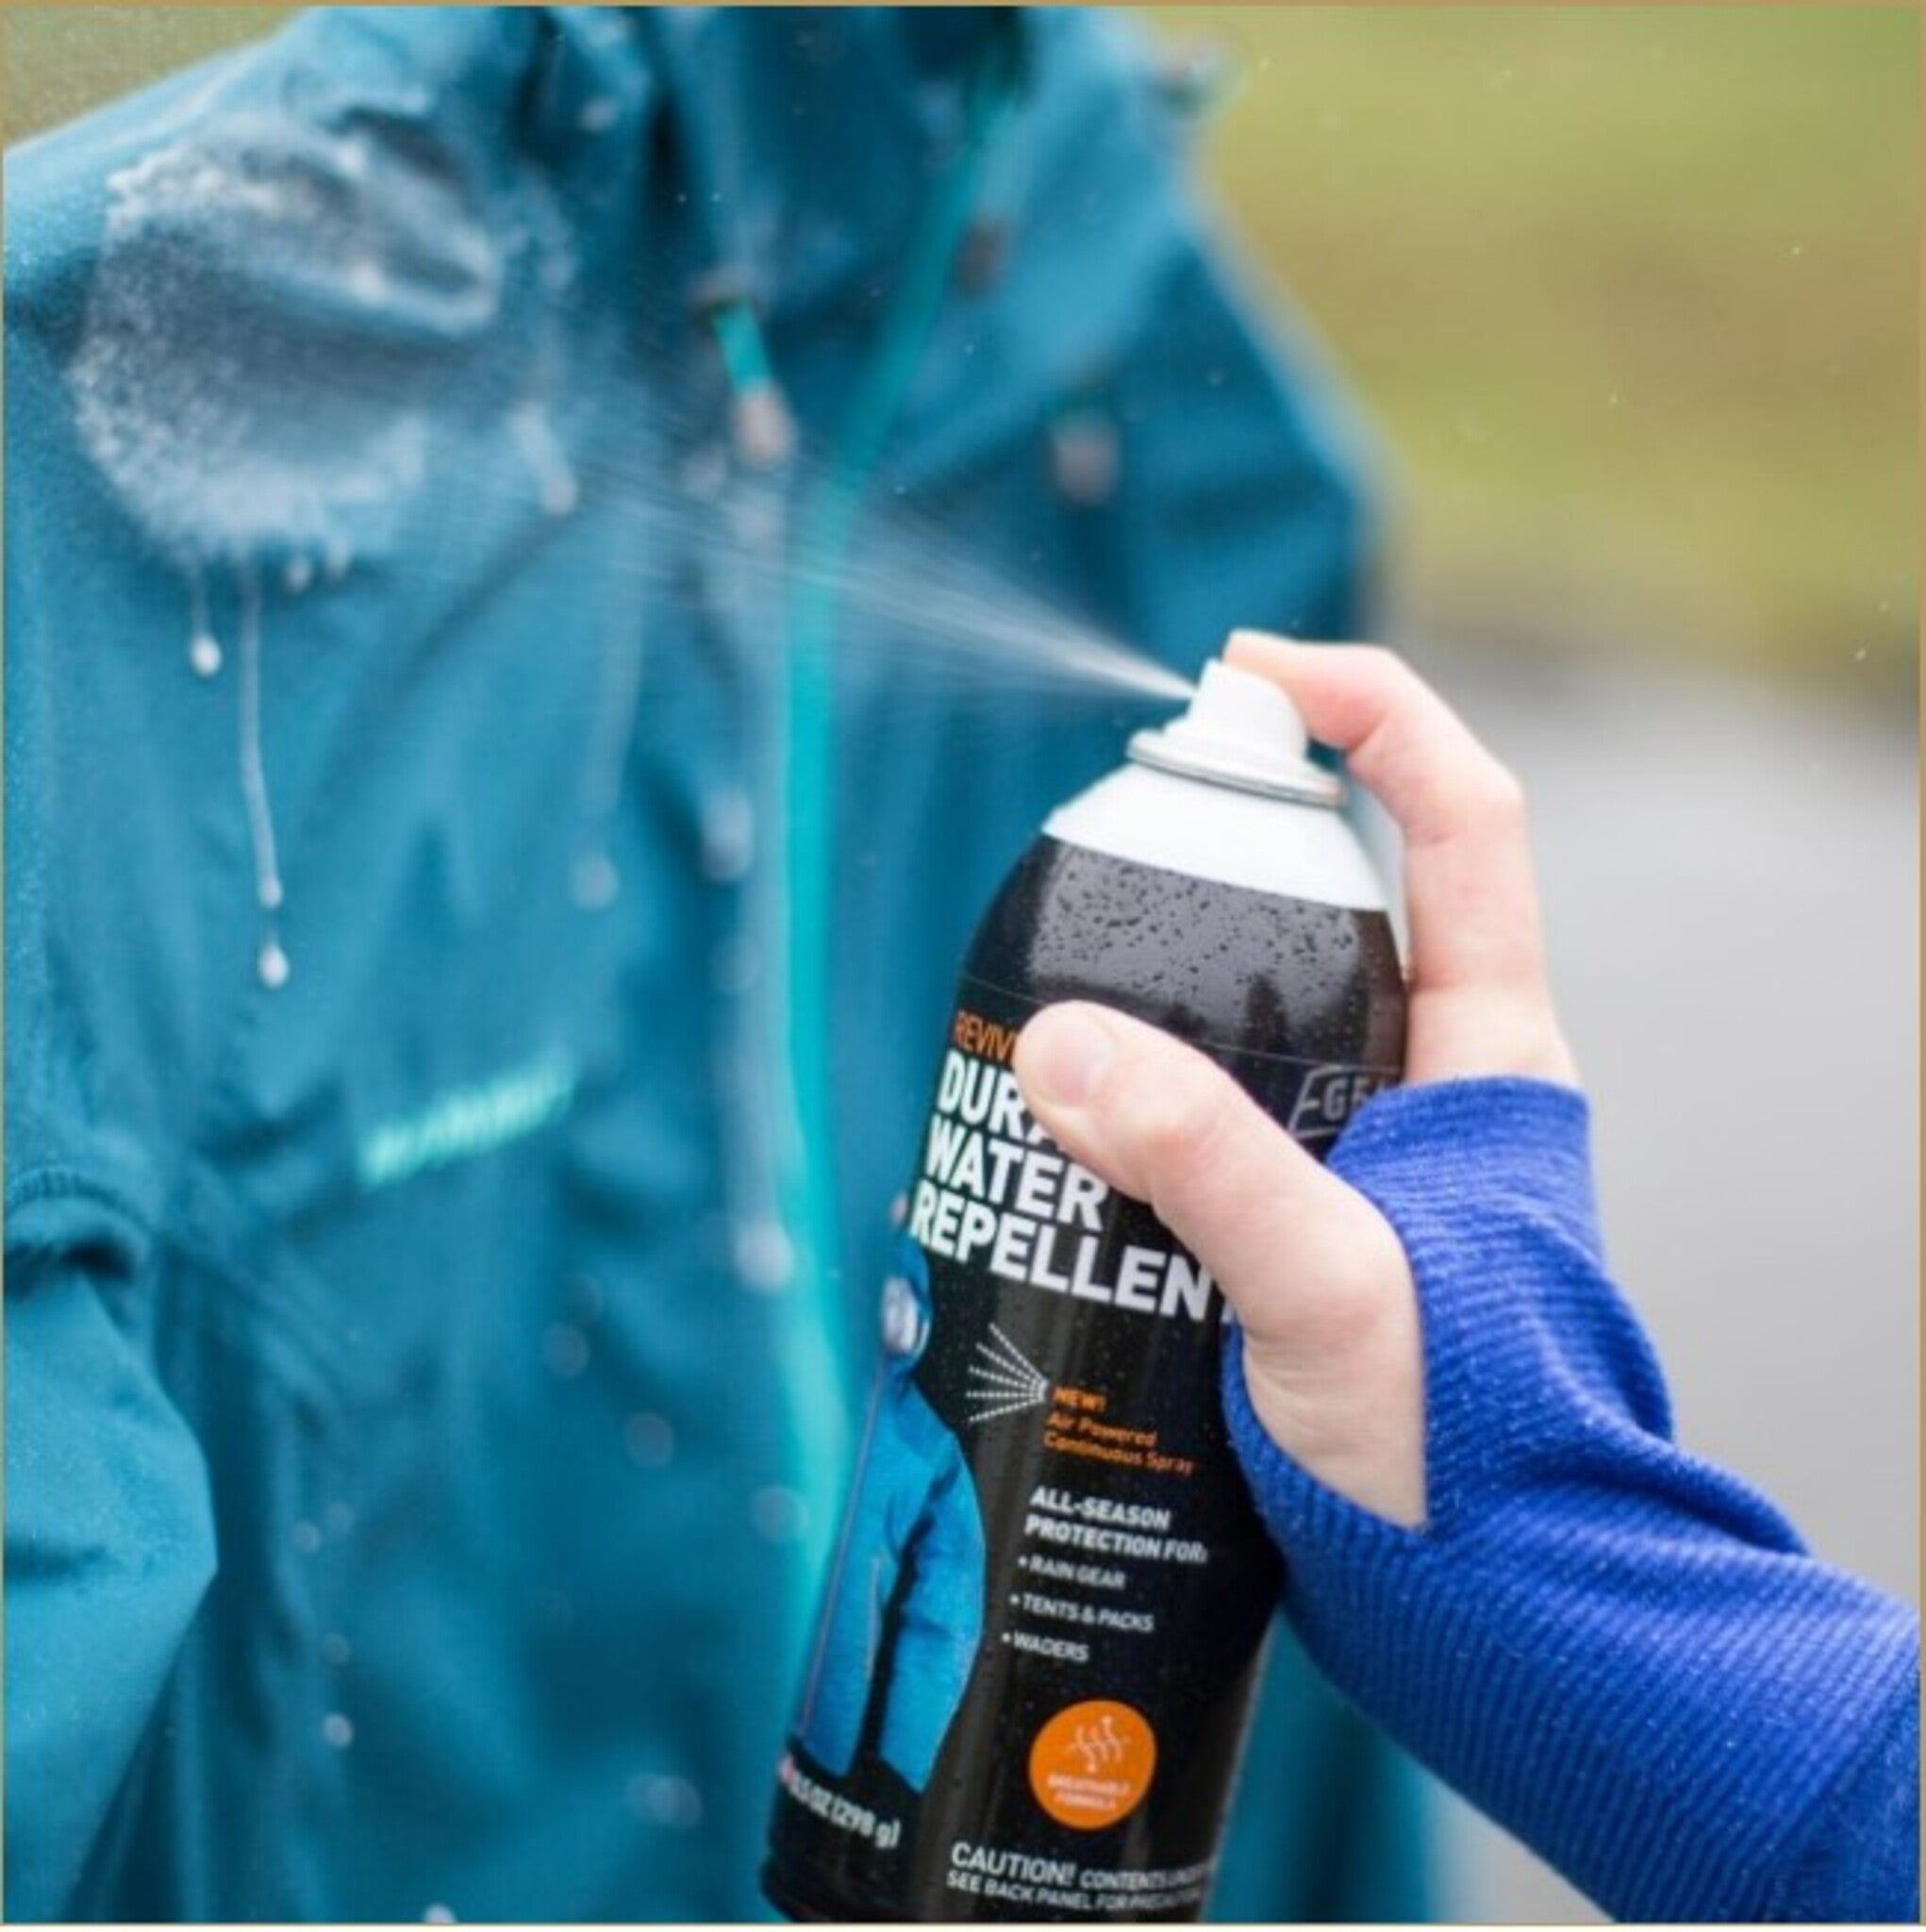 GEAR AID Revivex Durable Water Repellent 298ml 長效防潑水噴劑 36215